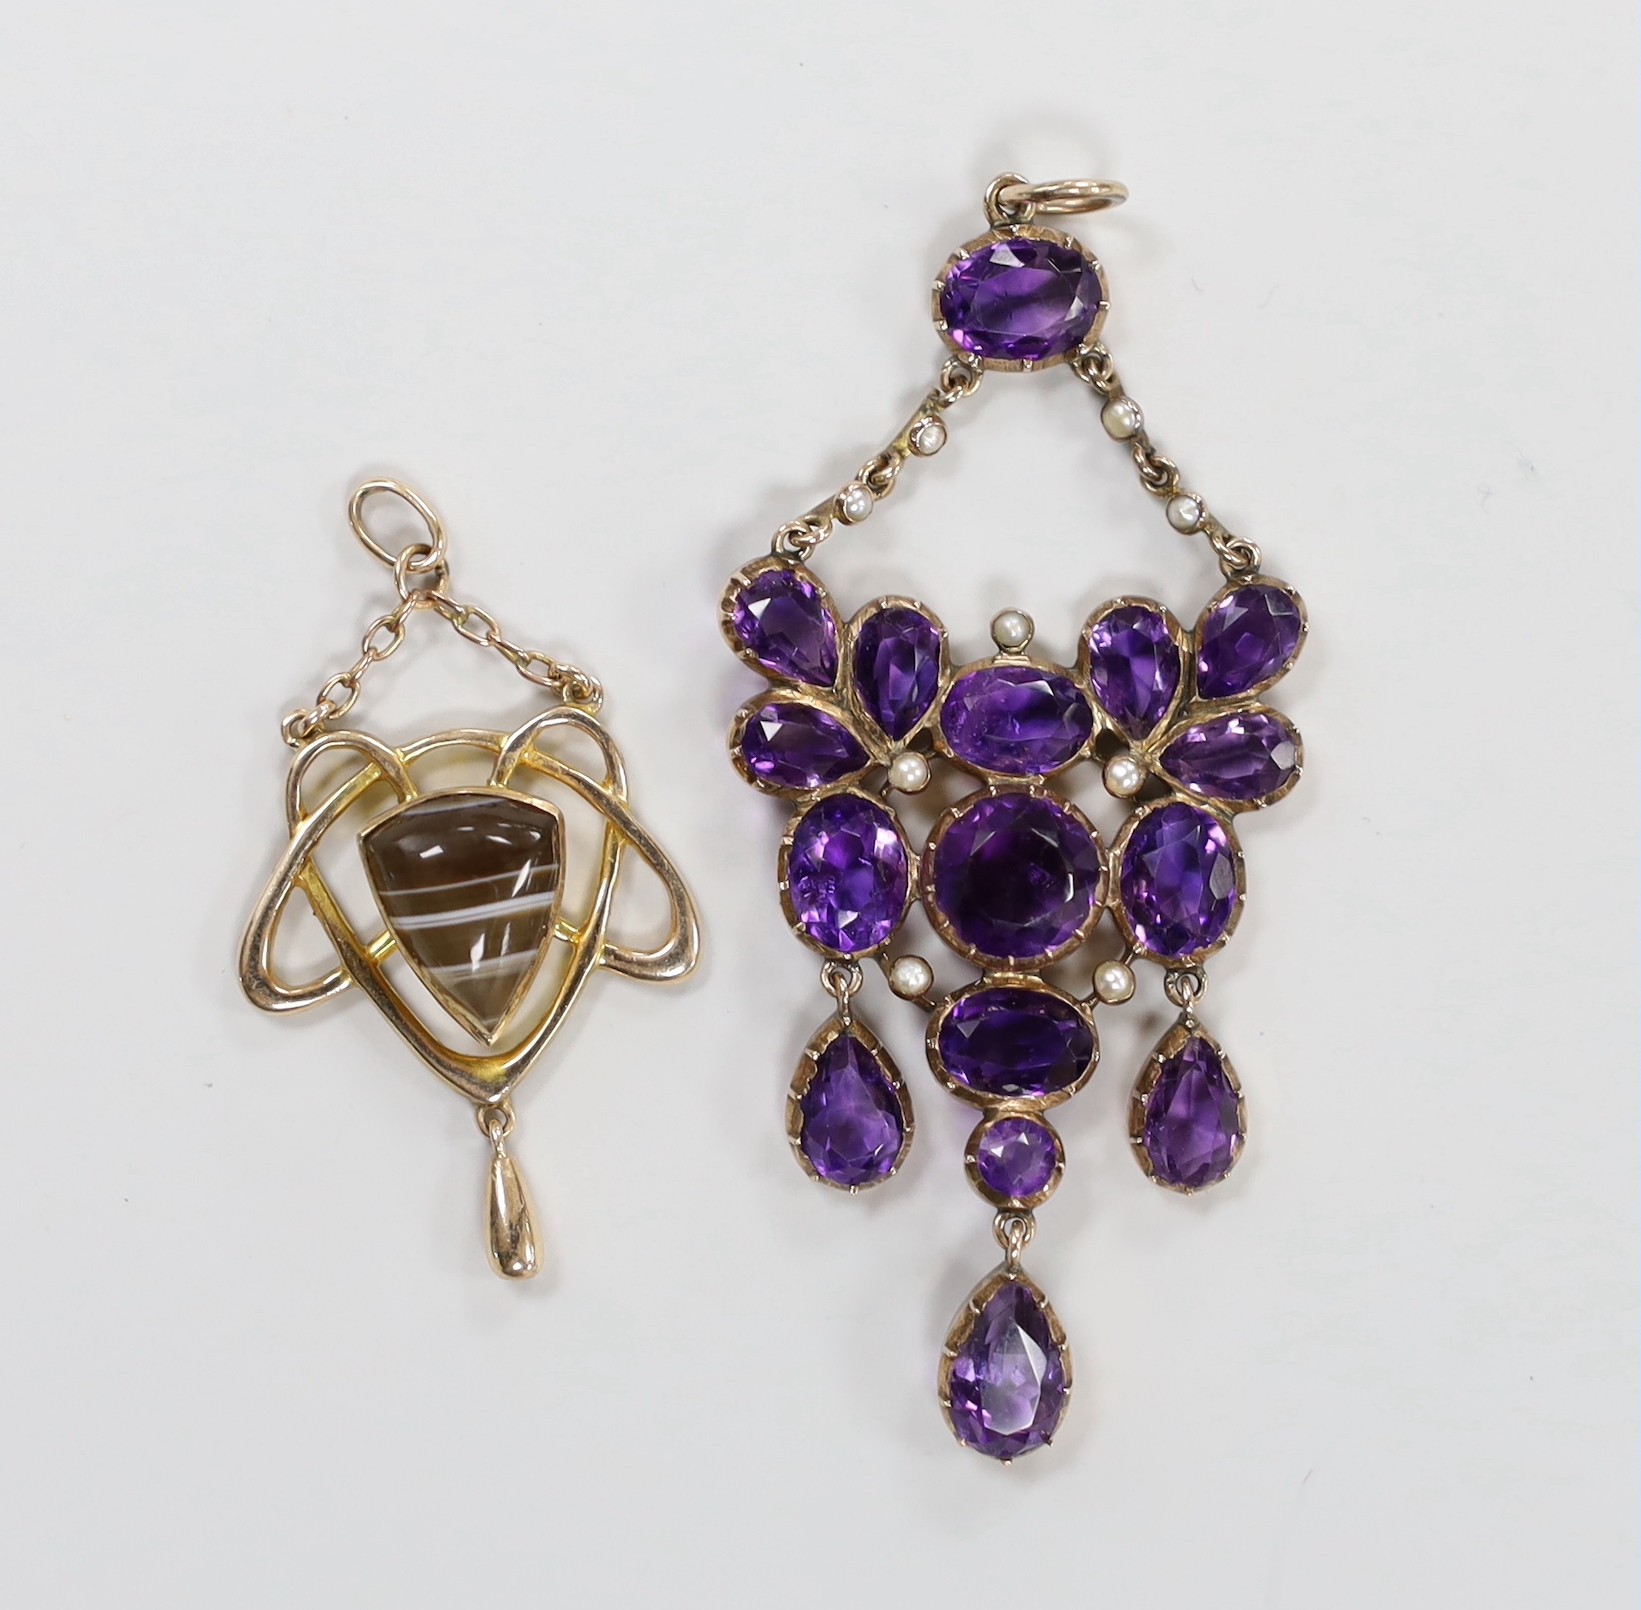 An early 20th century Art Nouveau 9ct and band agate set drop pendant, 37mm and a similar amethyst and seed pearl cluster set pendant, 62mm.